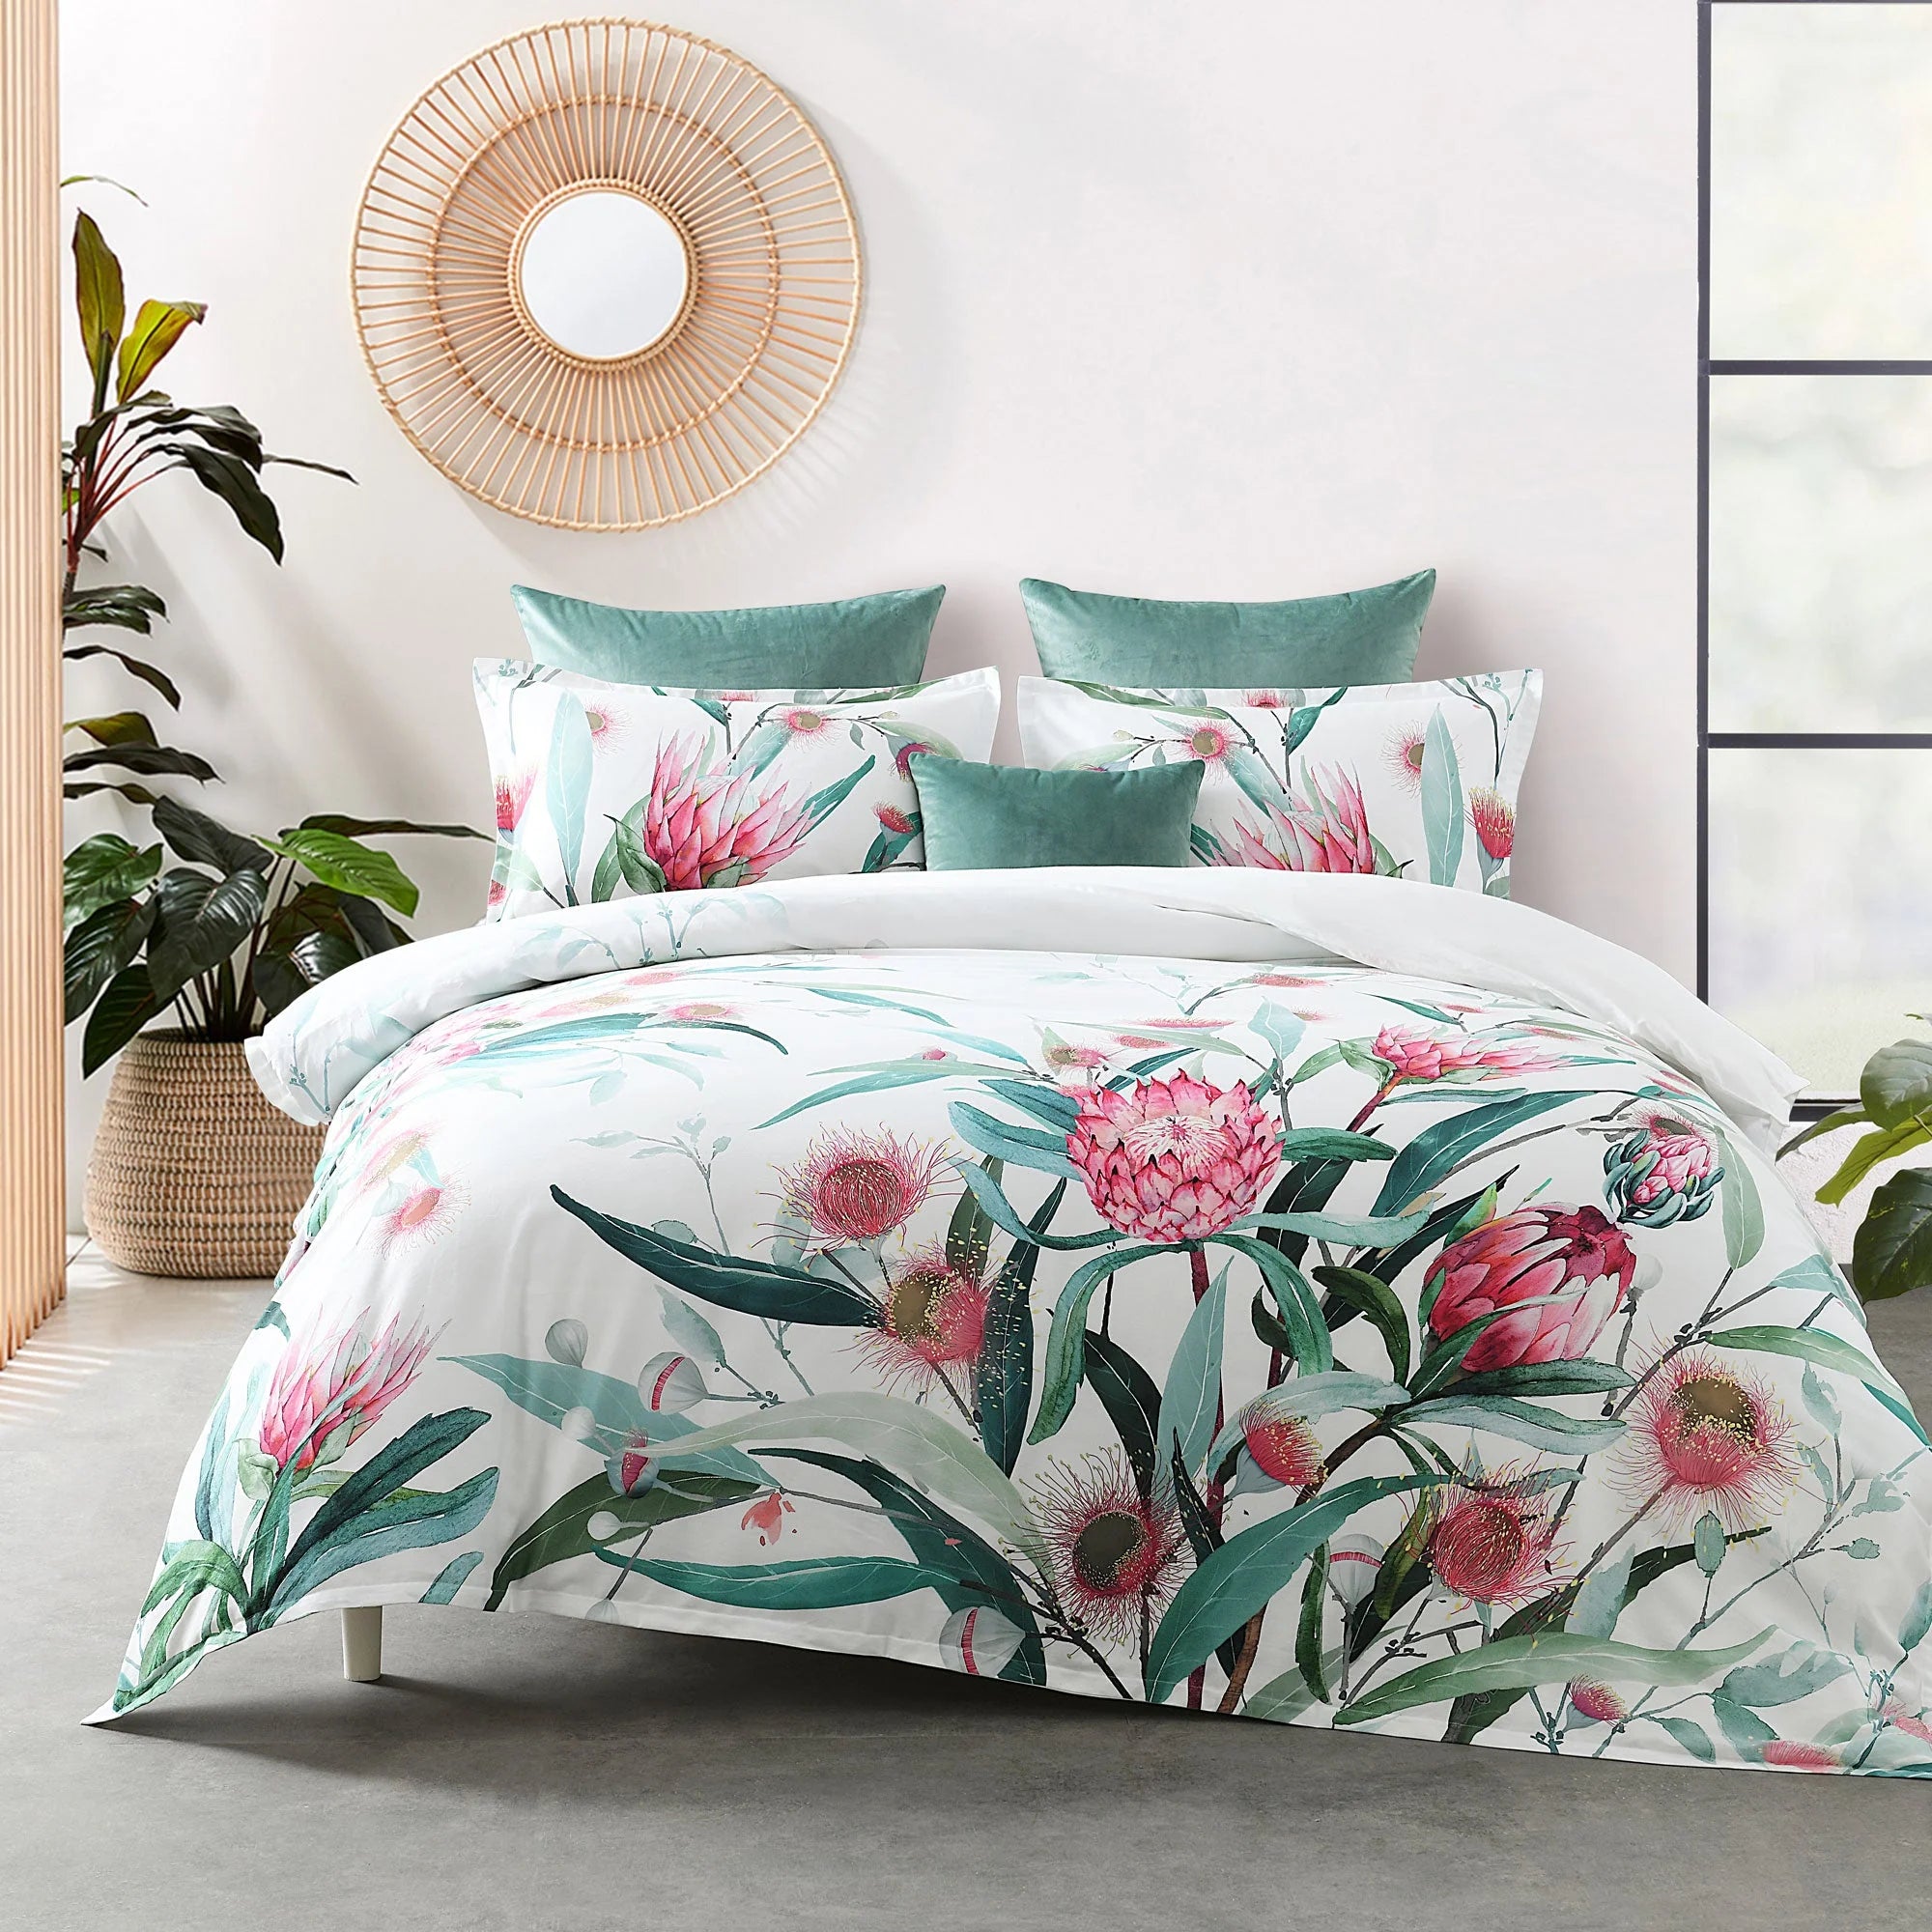 Delightful, blossoming pink waratahs contrast beautifully against the on trend neutral green tones of the leaves which spread across the entire quilt cover. Panel printed on soft cotton sateen fabric, Australiana will brighten up your space. Complete the look with our luxurious velvet accessories in sage.